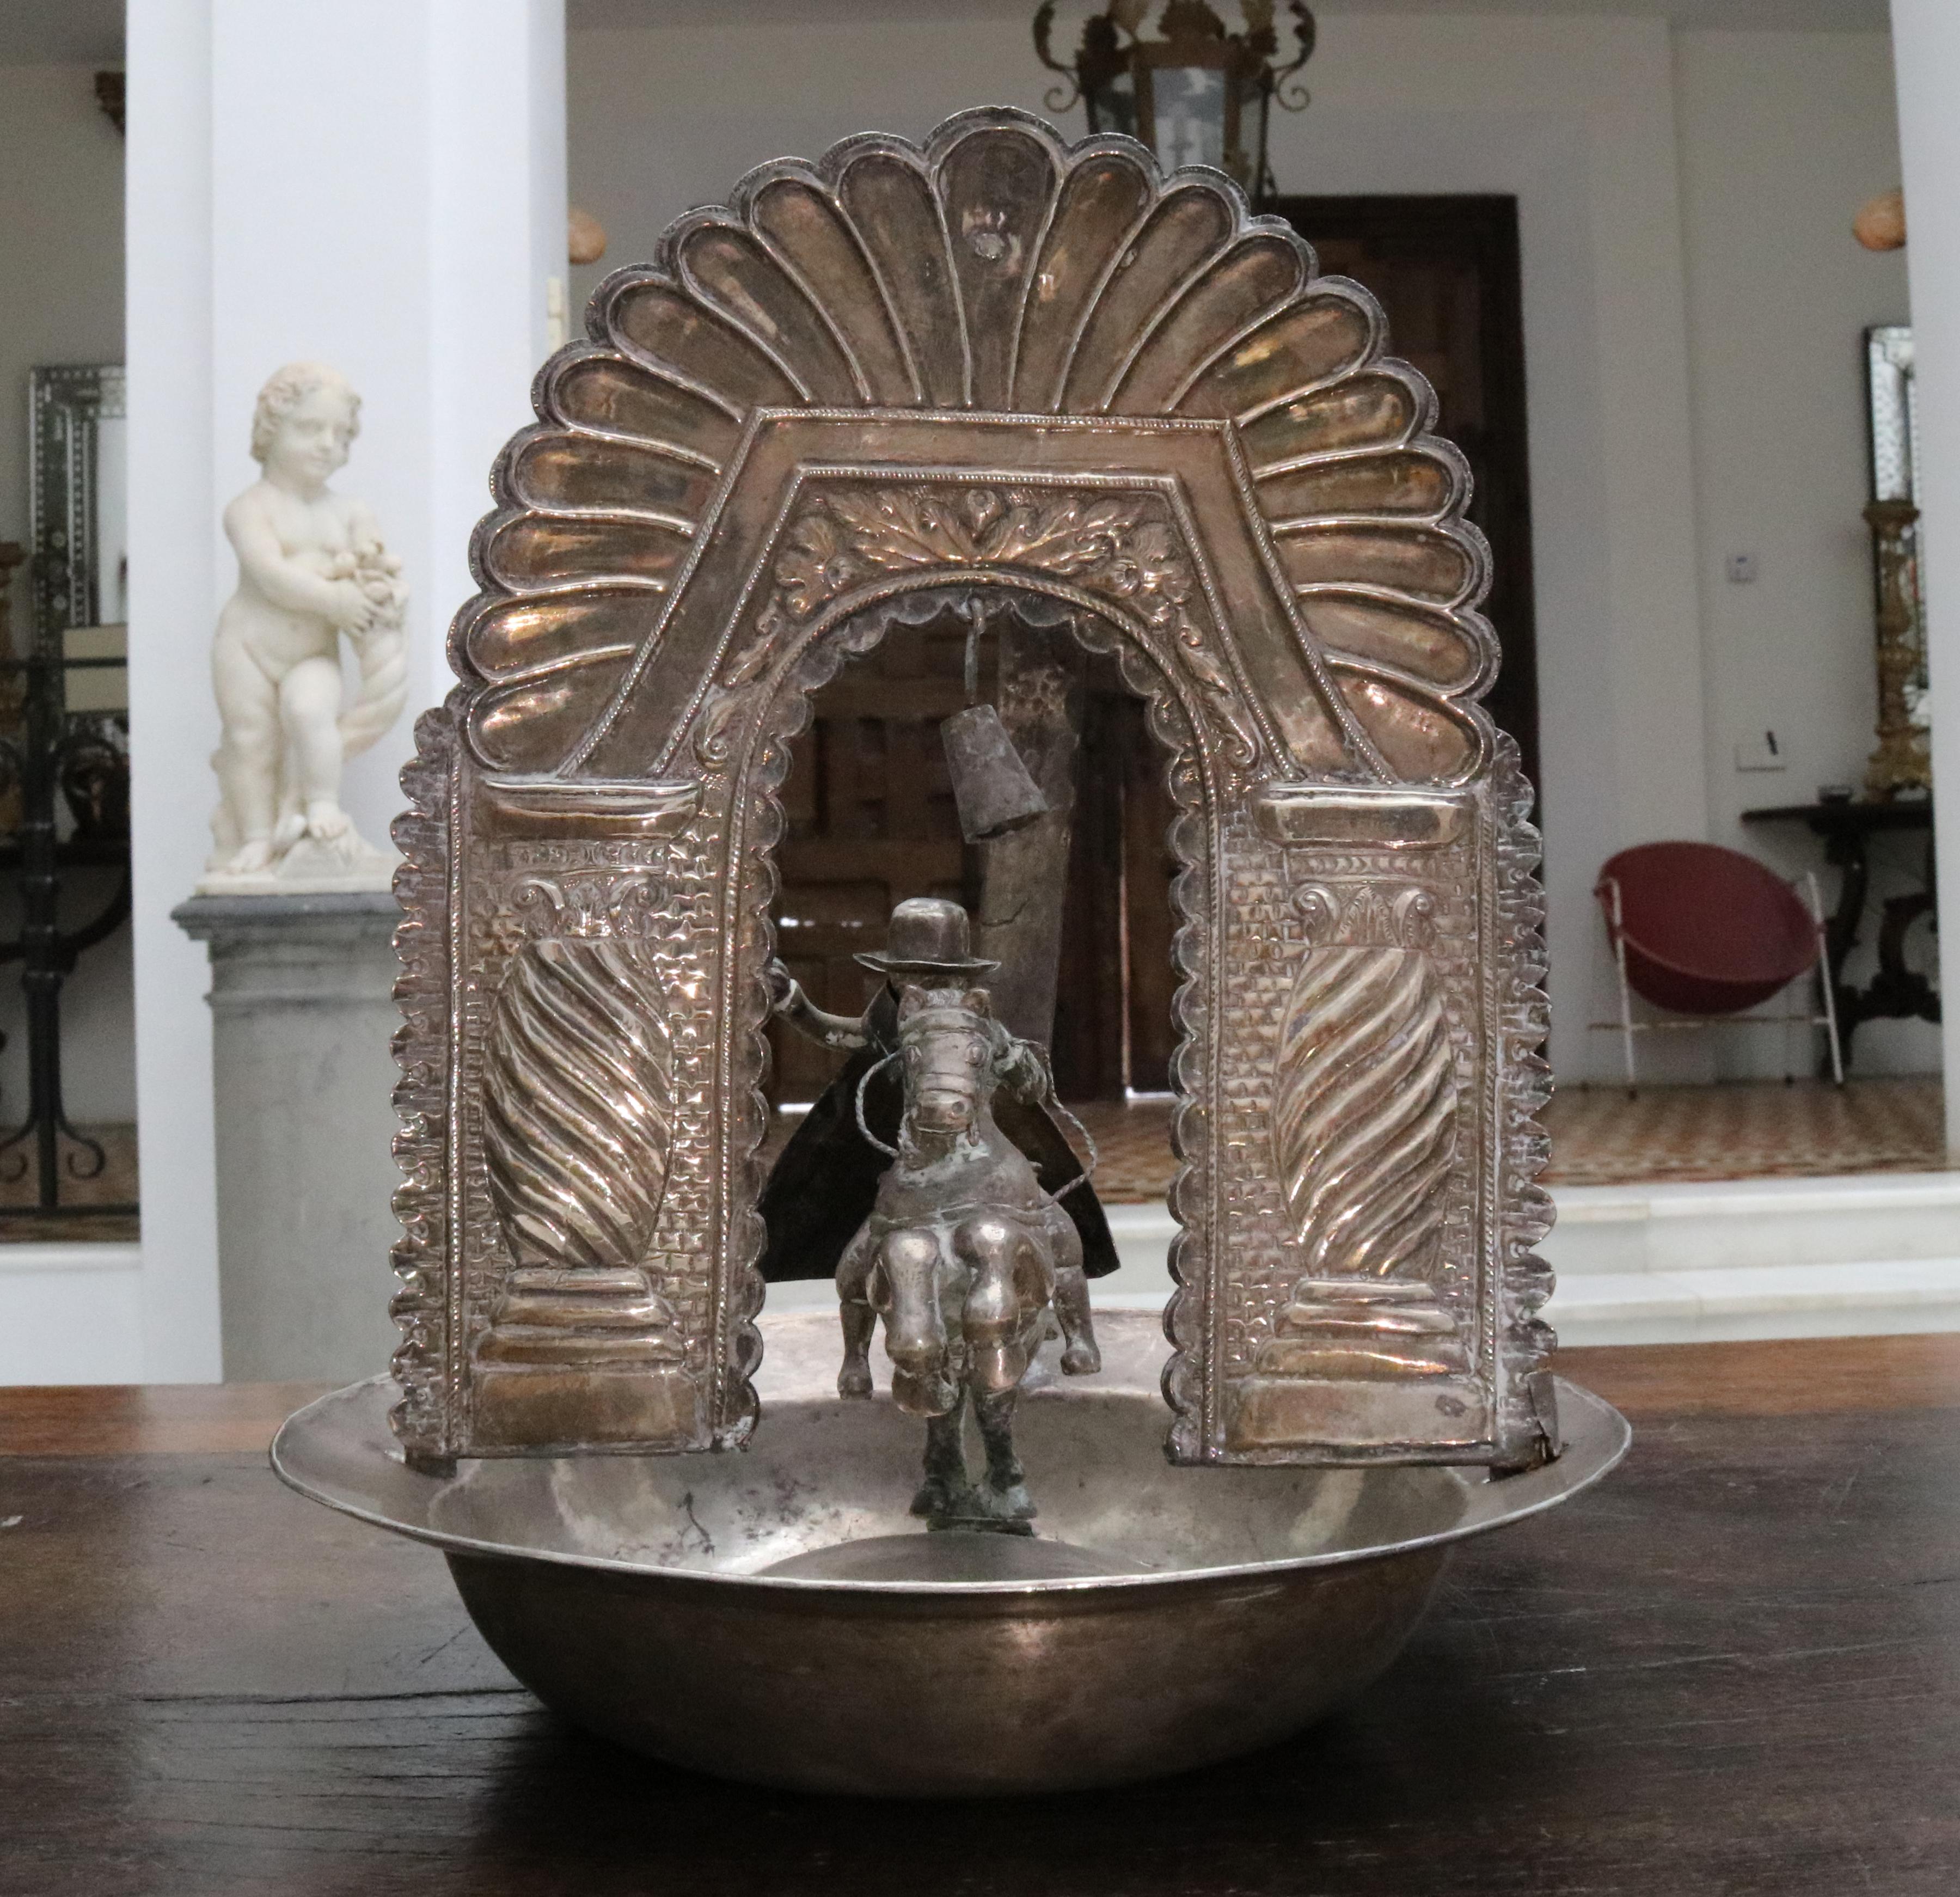 19th century Bolivian or Peruvian silver alms dish with Saint James riding a horse. 

Total silver by weight: 1.291 g.